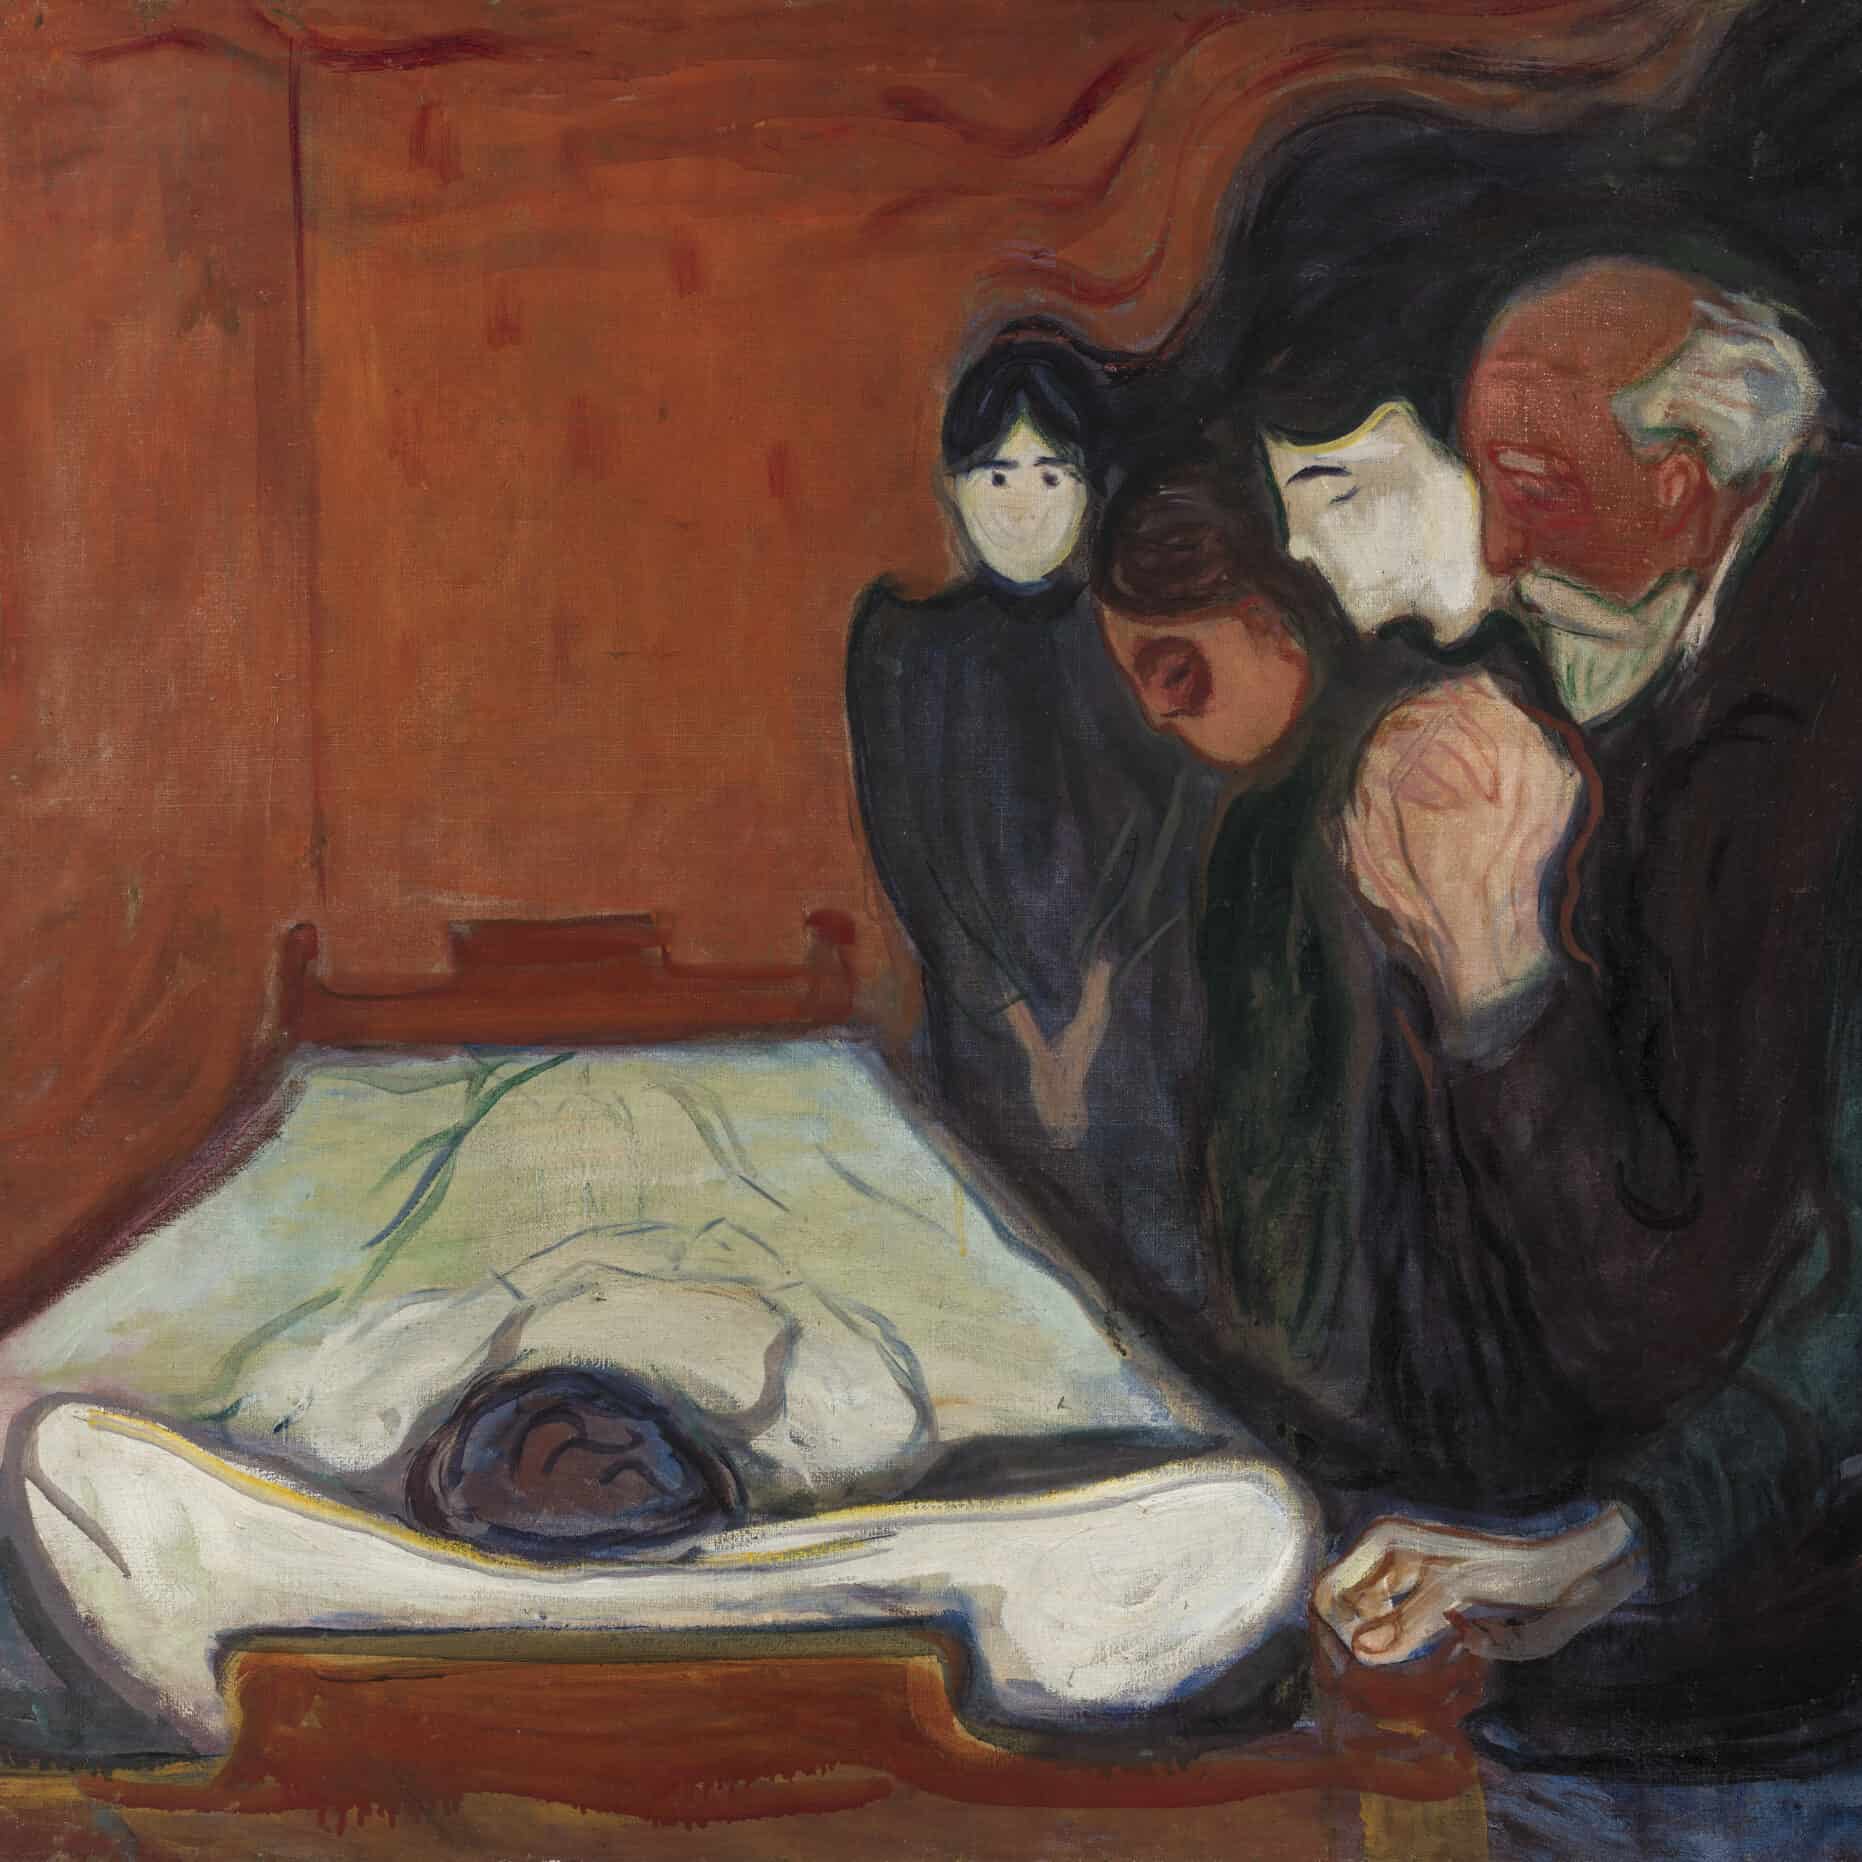 Edvard Munch - By the death bed (1896)